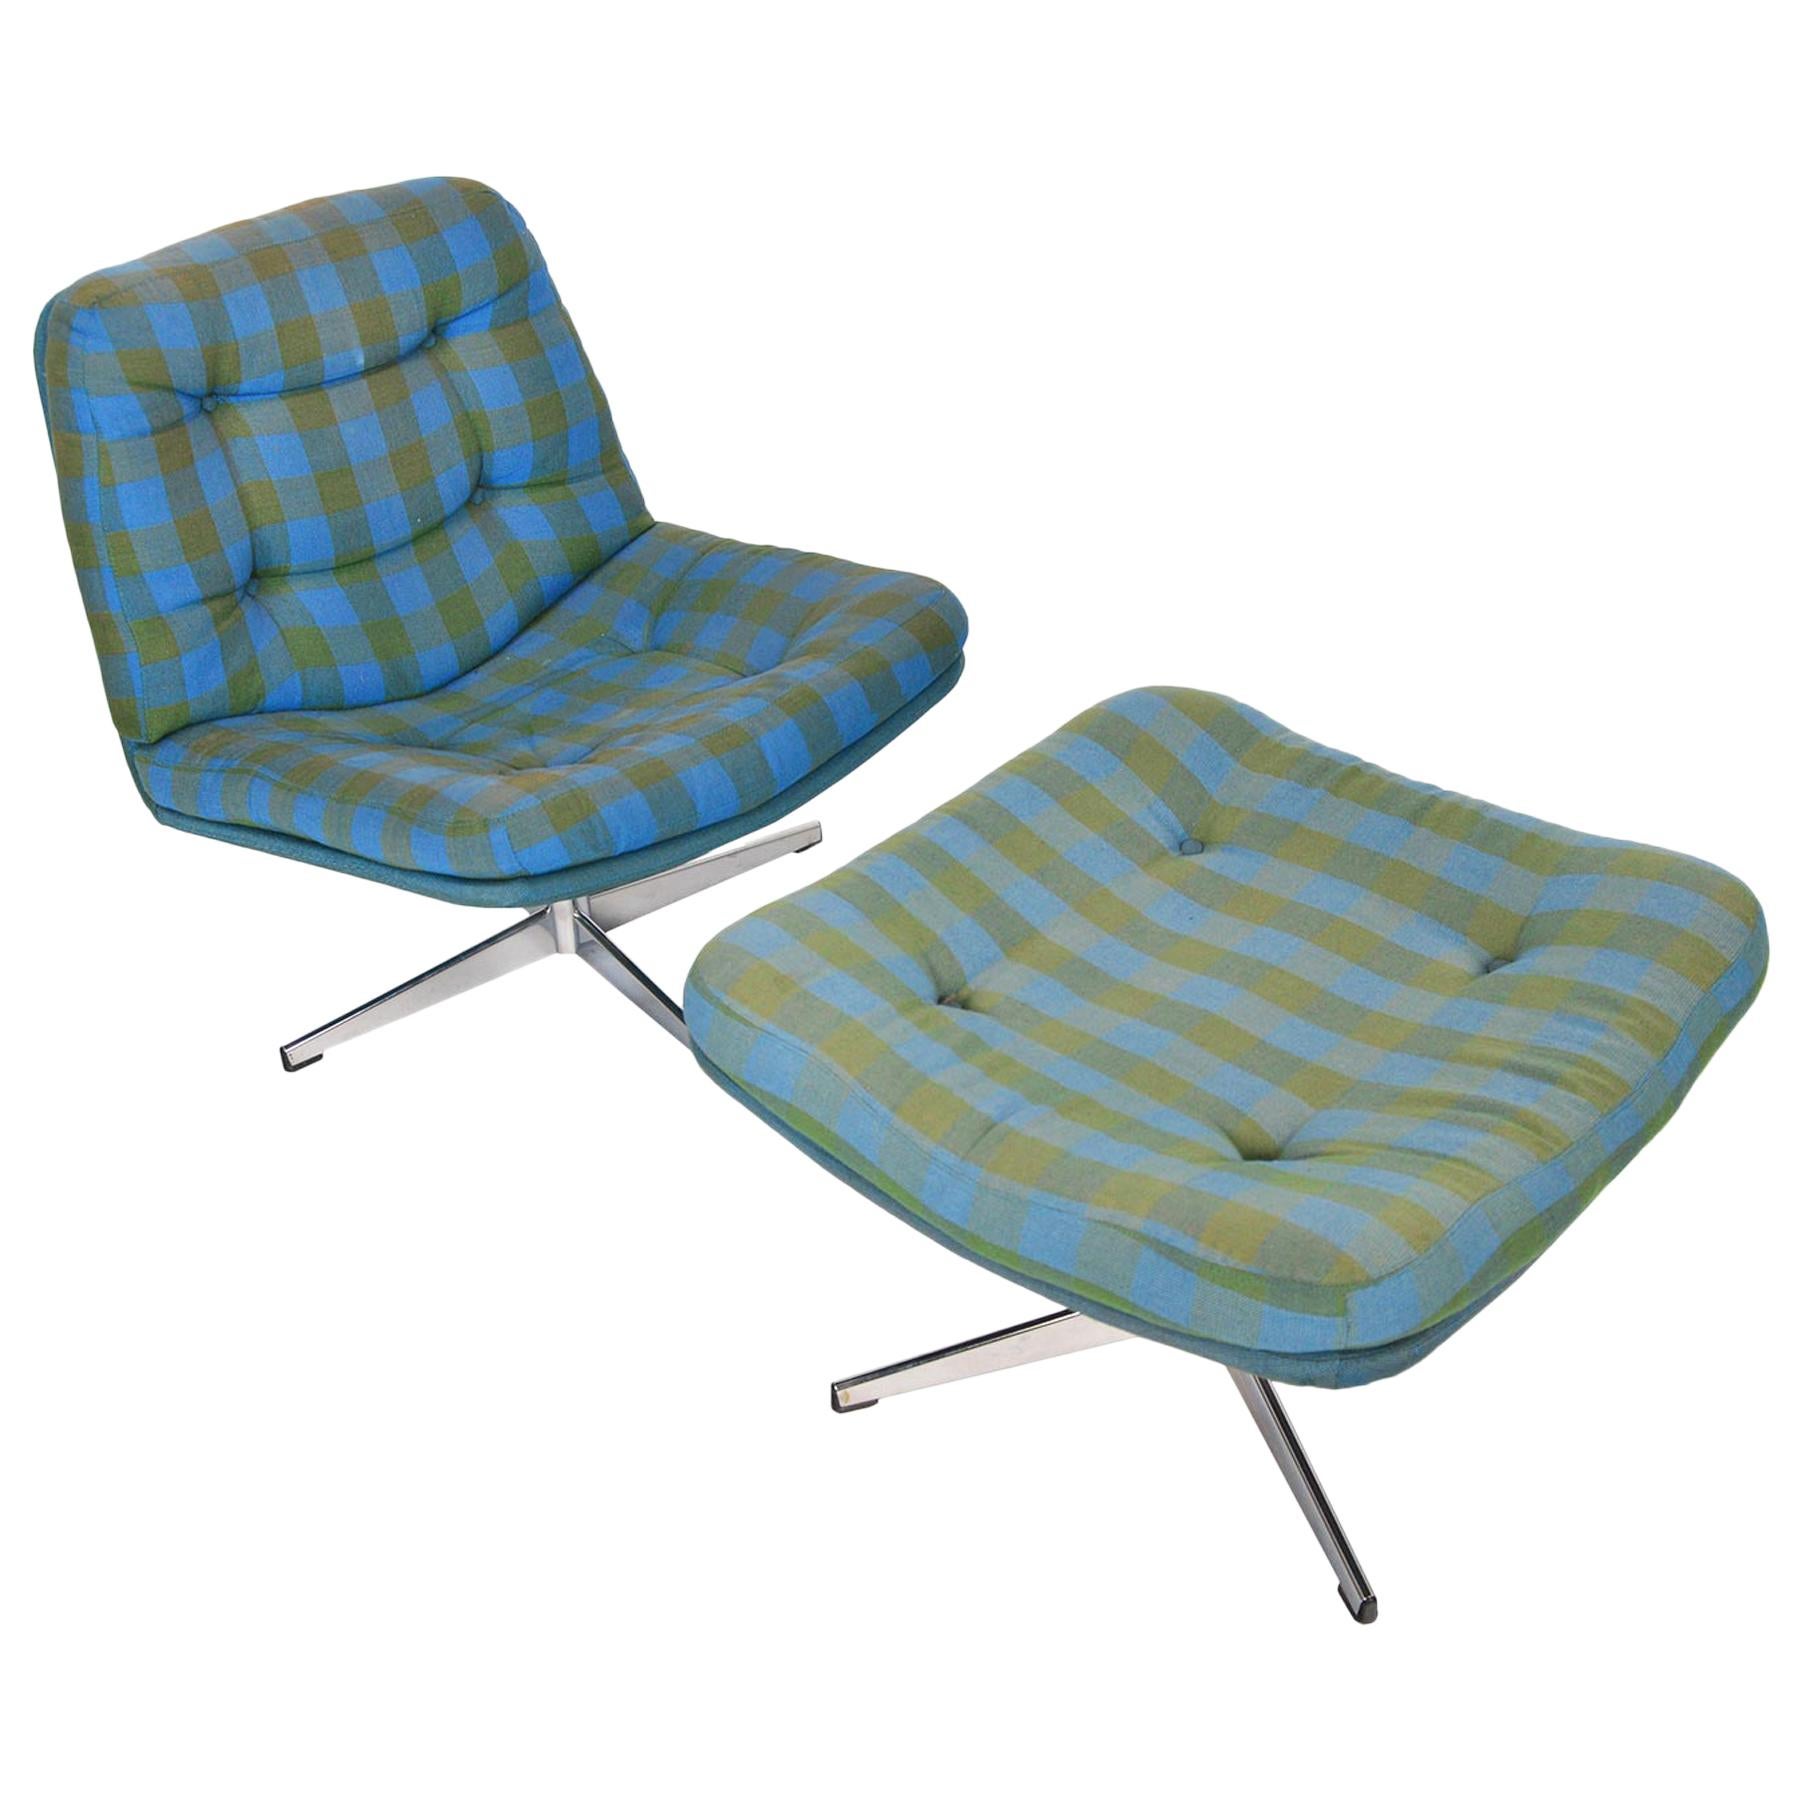 Space Age Swivel Midcentury Danish Modern Lounge Chair and Ottoman